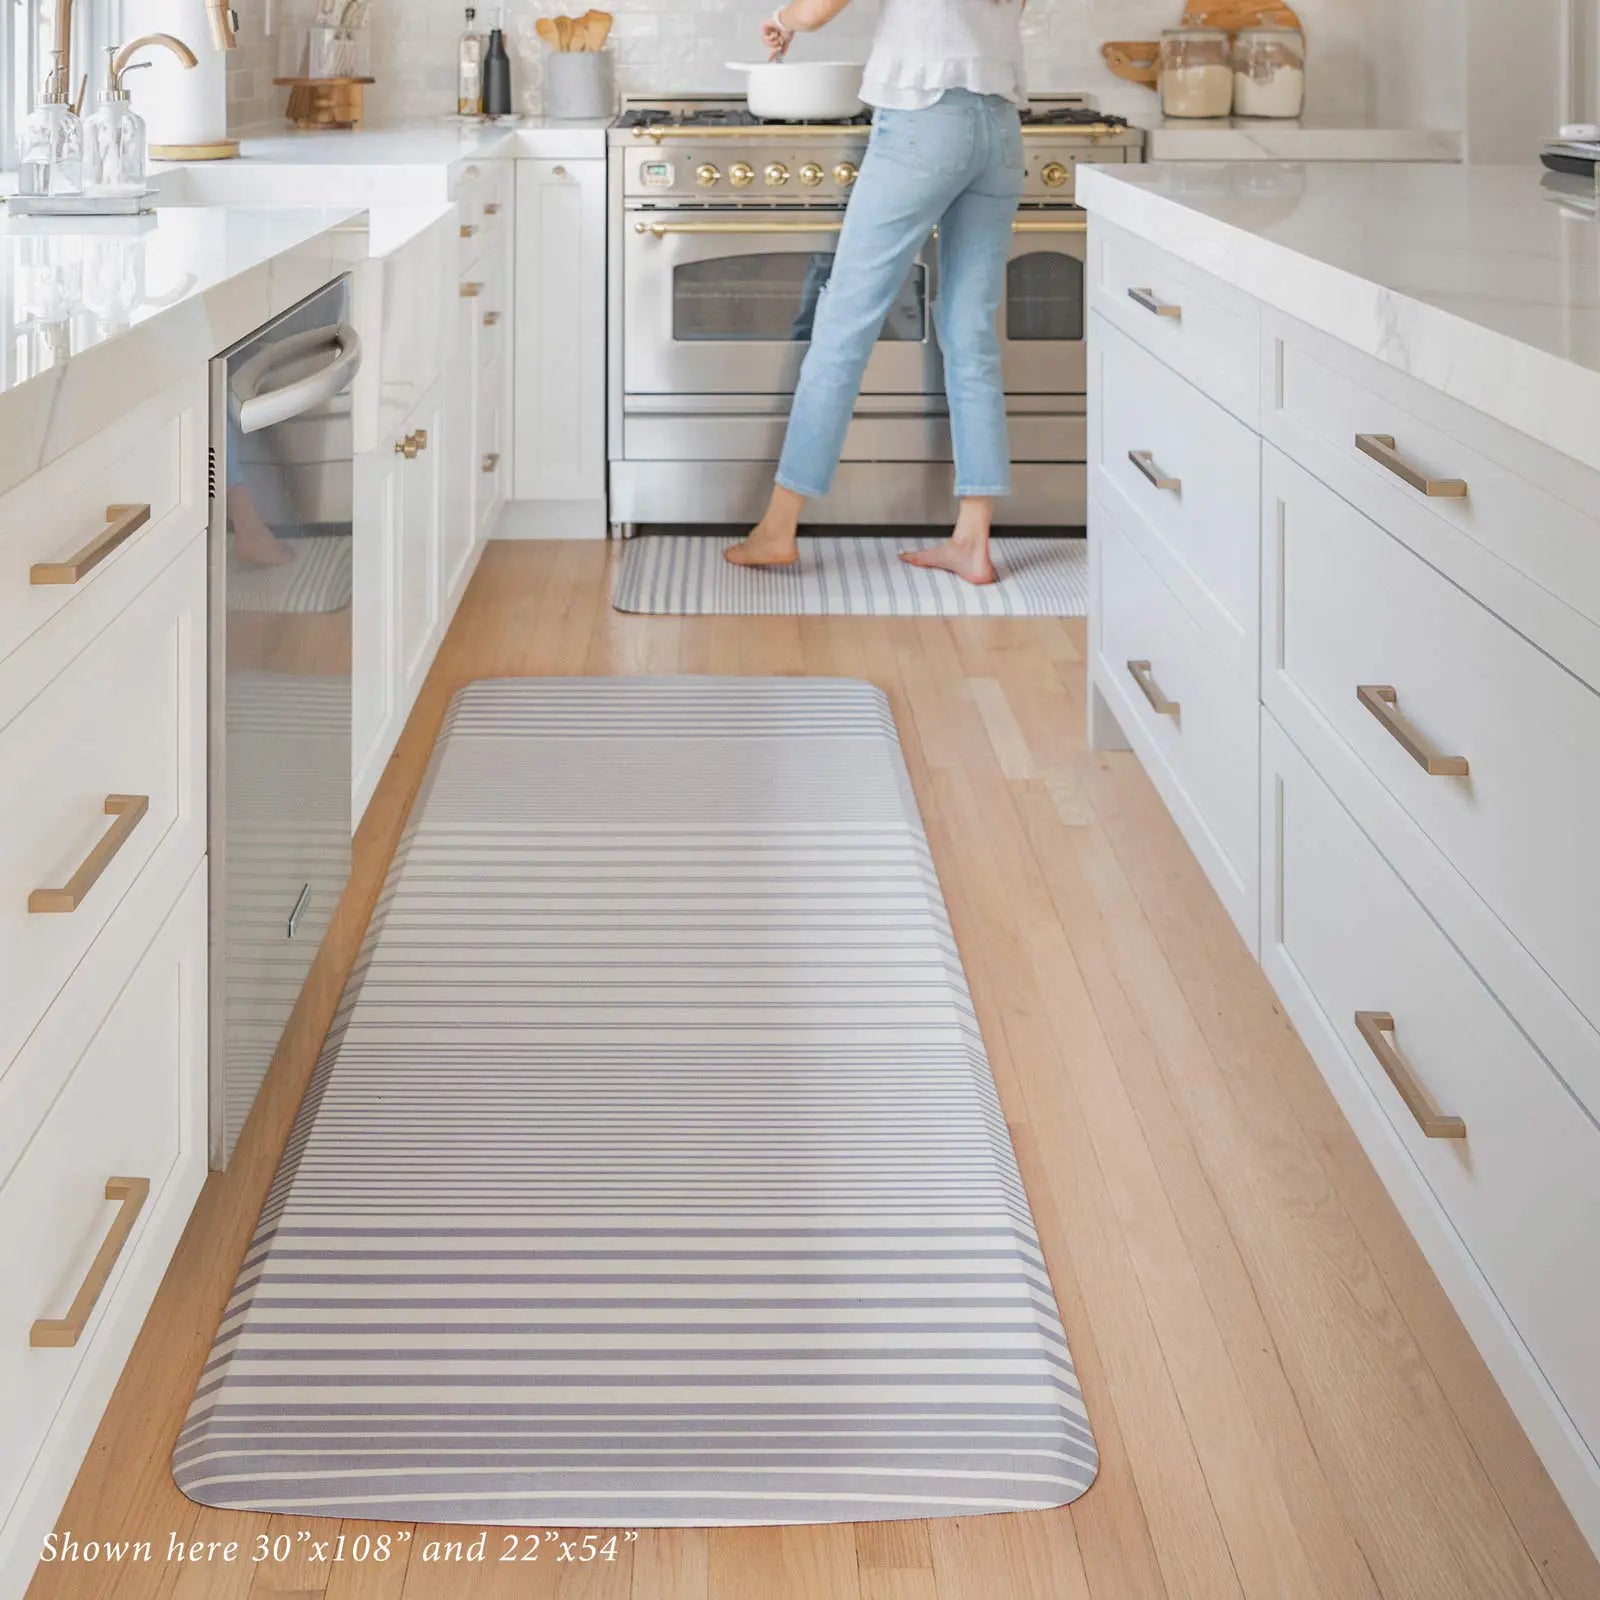 Blue and white minimal stripe kitchen mat in kitchen shown in 30x108 and 22x54 sizes.